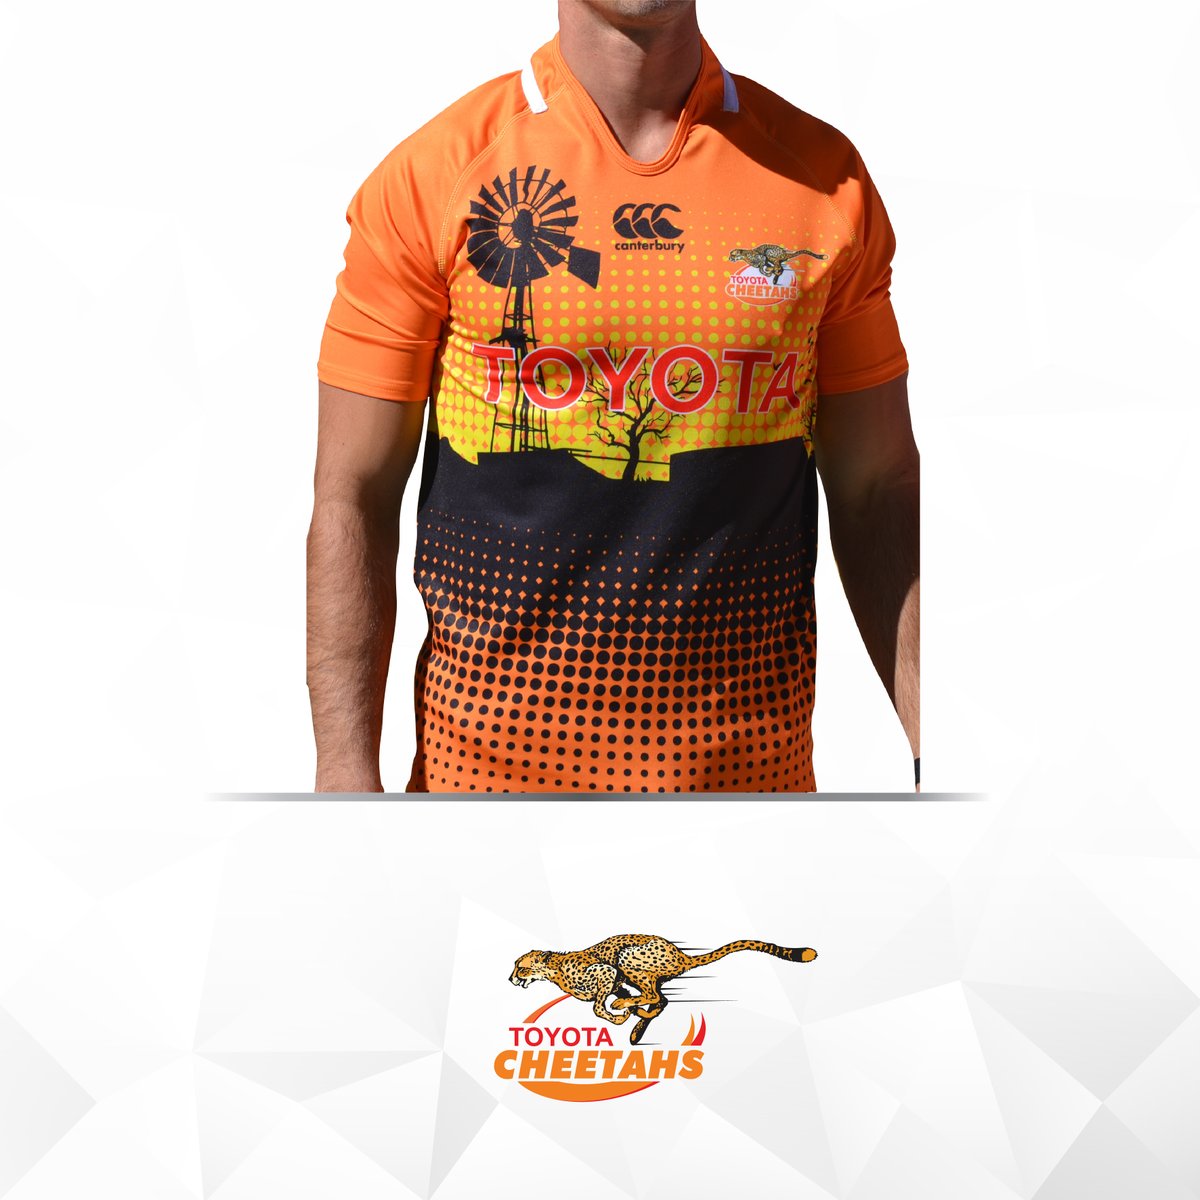 cheetahs rugby jersey 2020